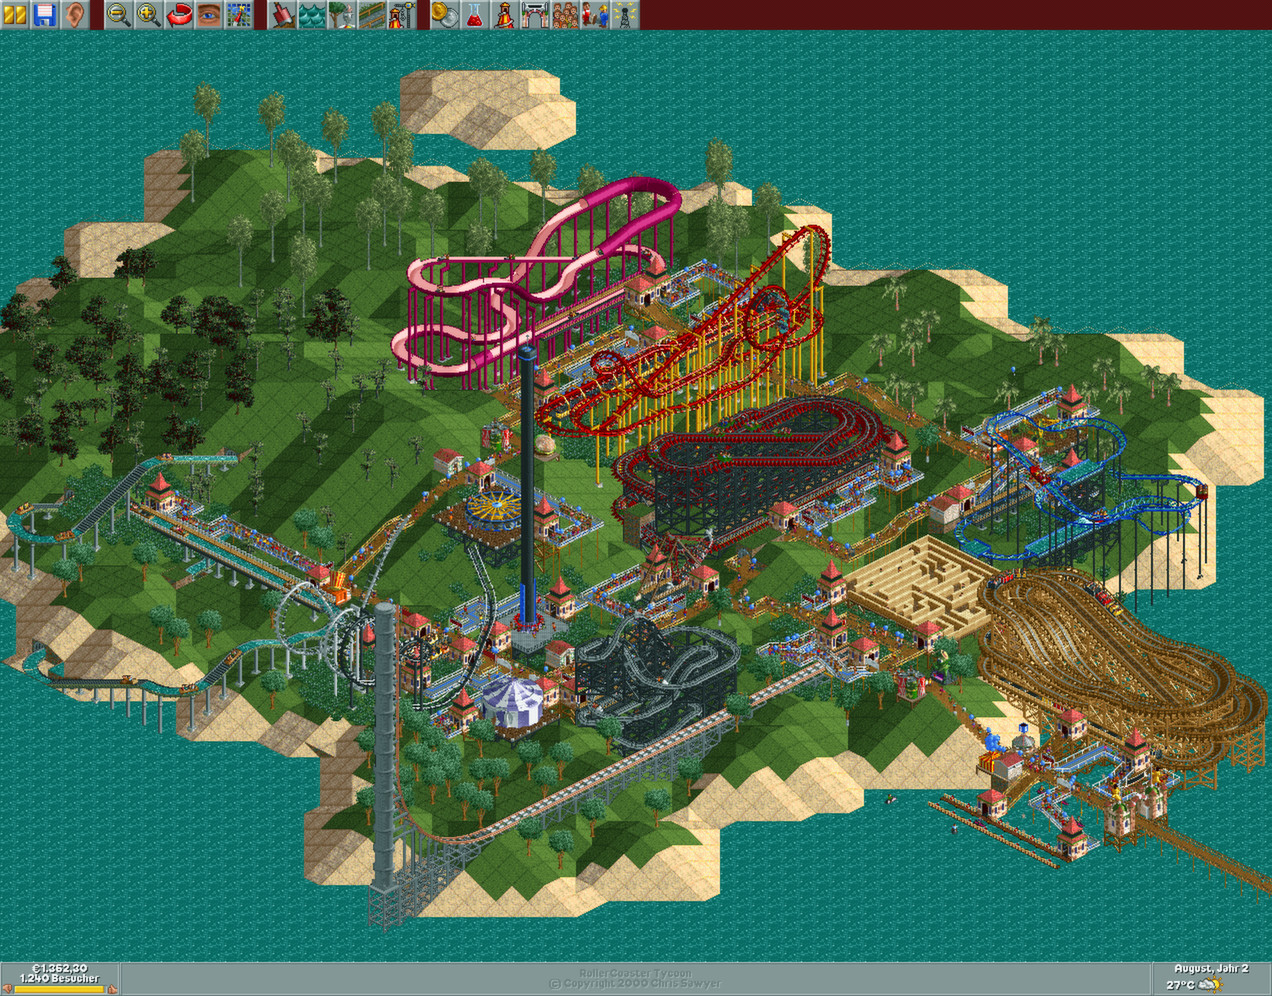 Rollercoaster tycoon classic expansion packs - pooterstamp